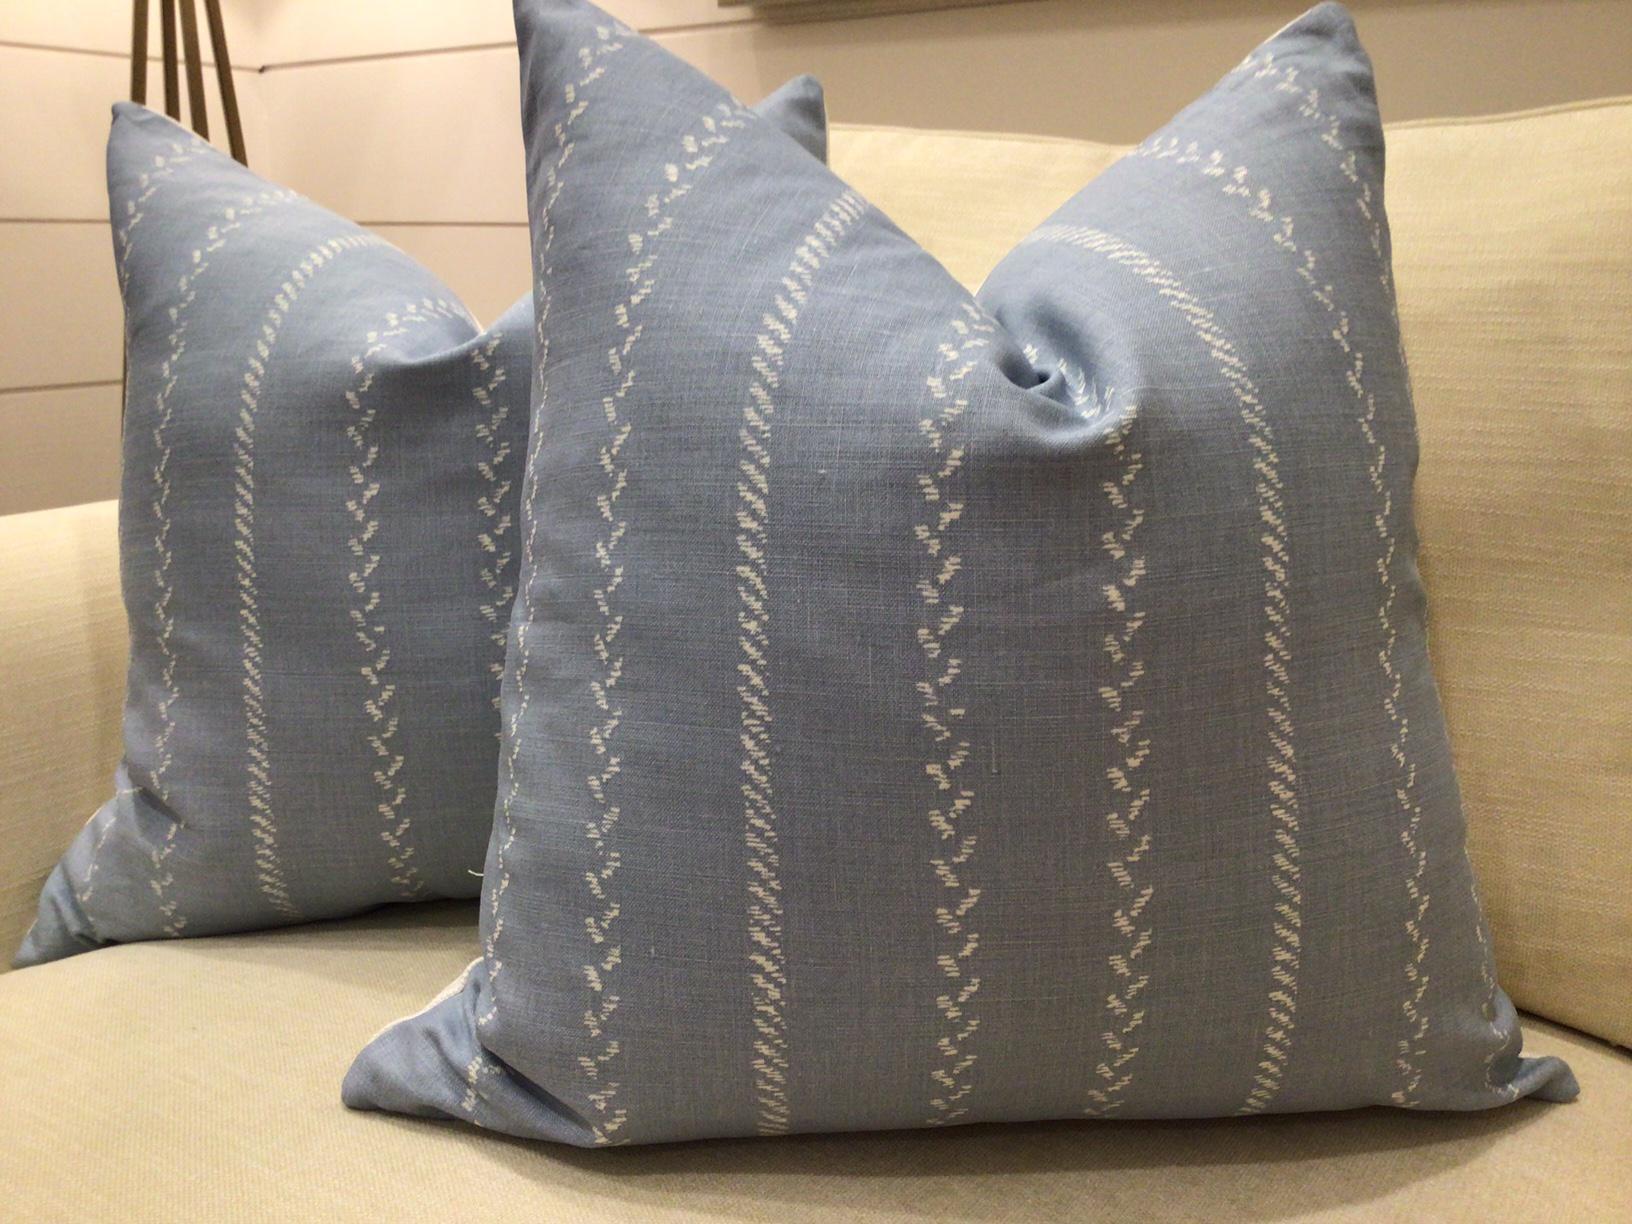 Lee Jofa “Pelham Stripe” in Soft Blue & White Pillows- a Pair In New Condition For Sale In Winder, GA